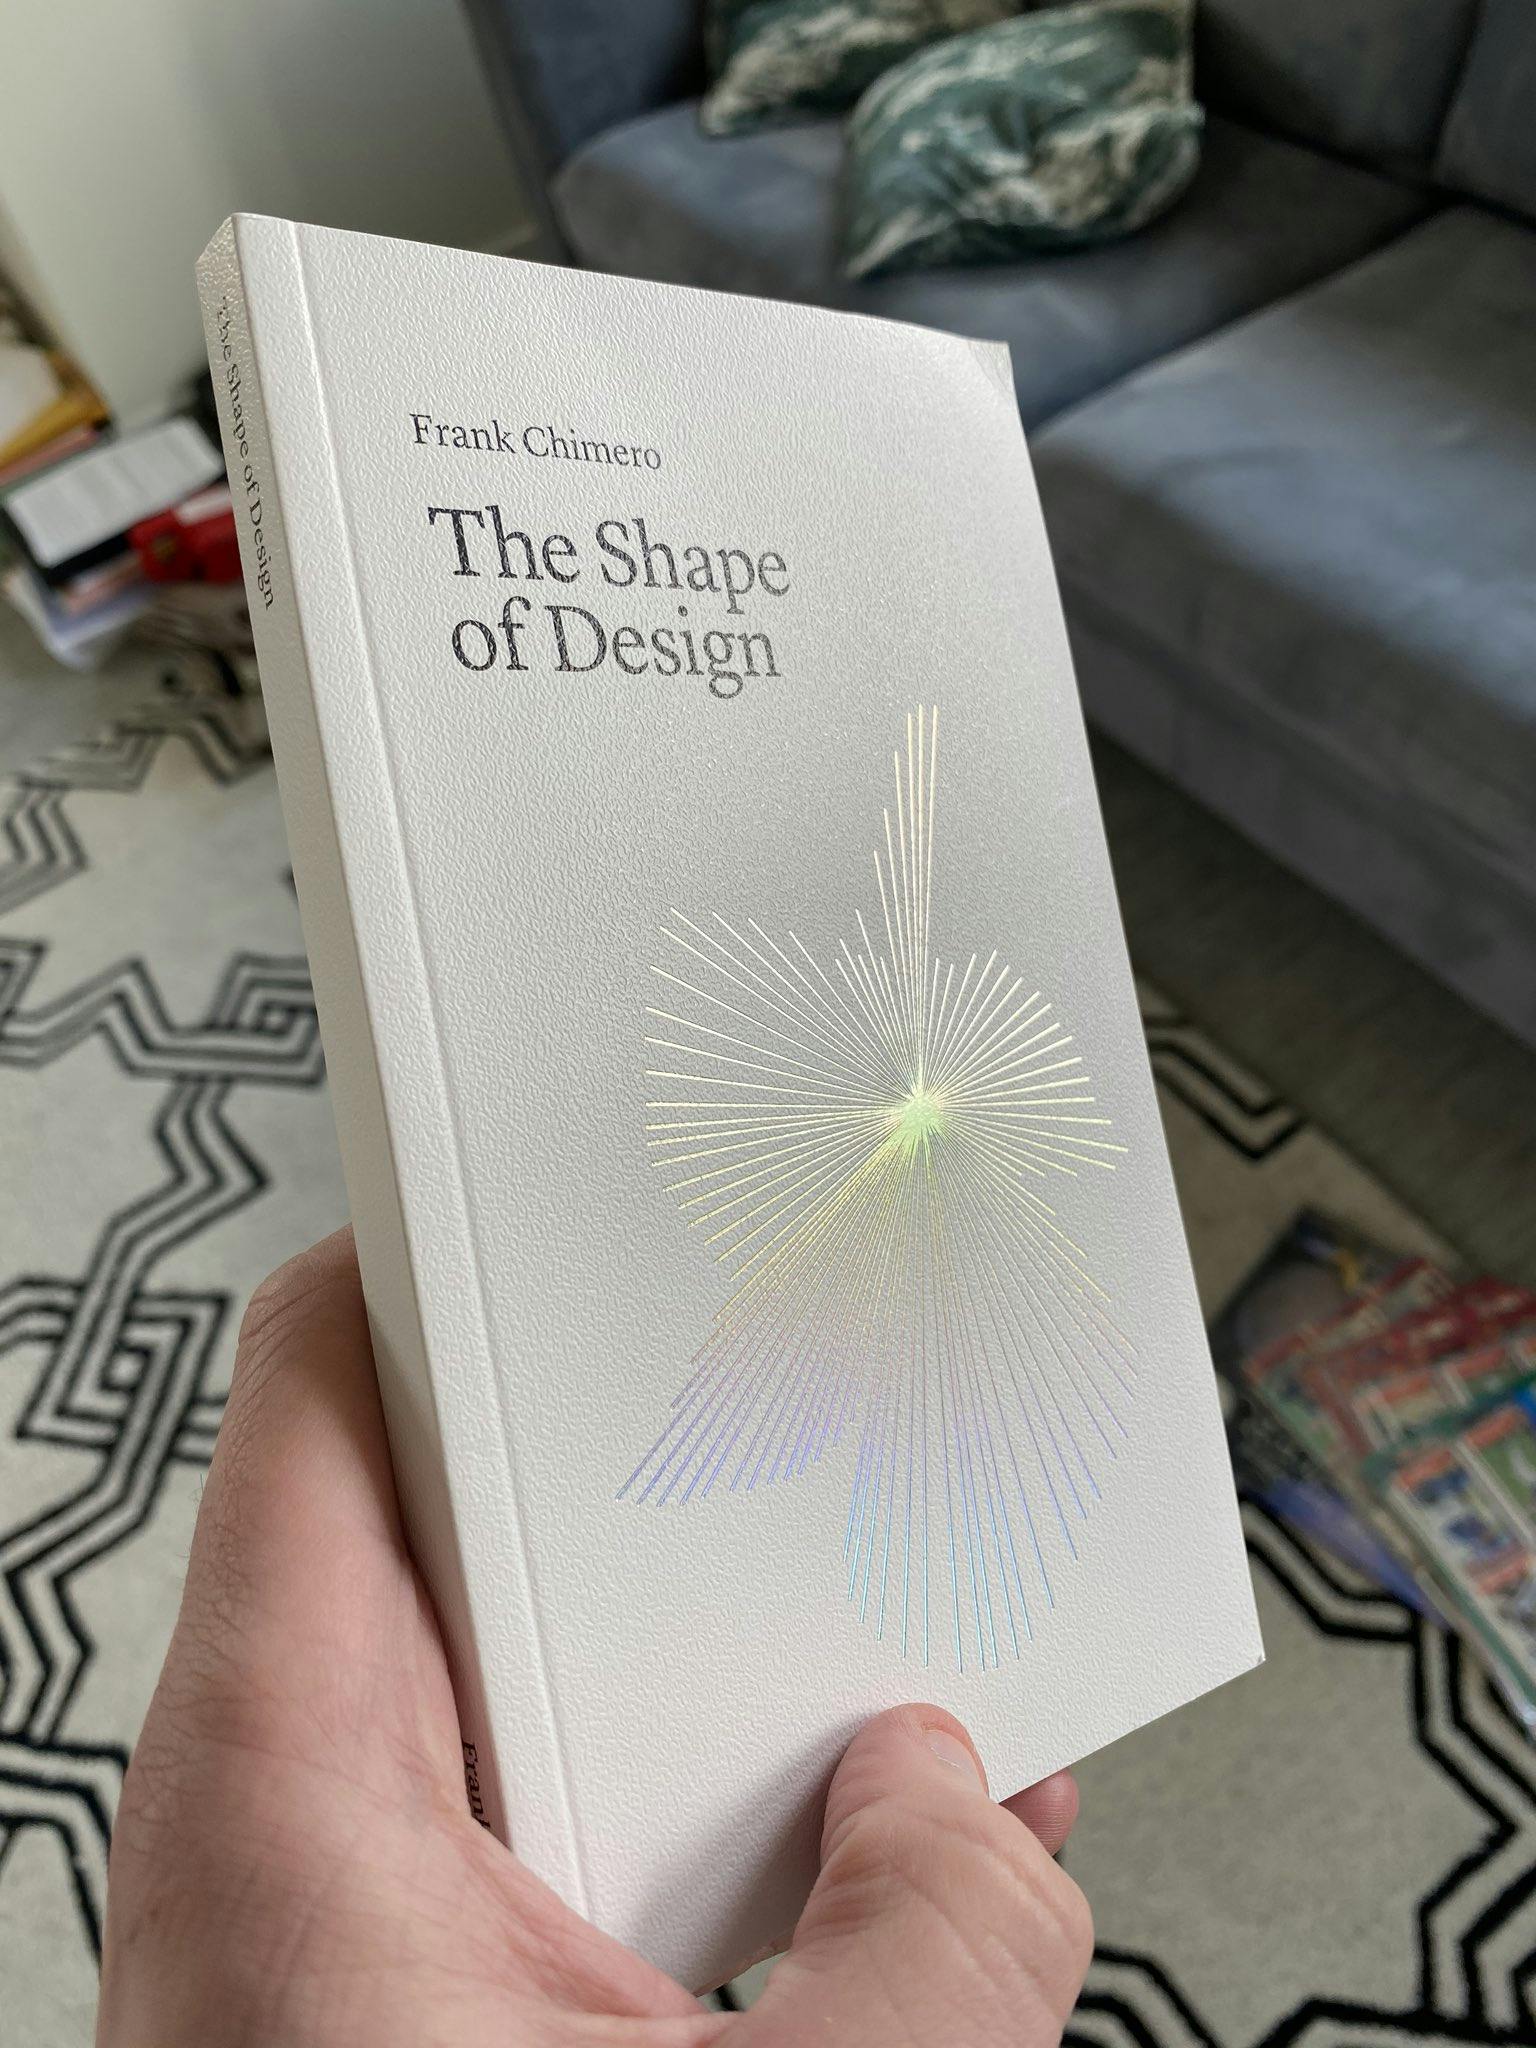 A photo of The Shape of Design.